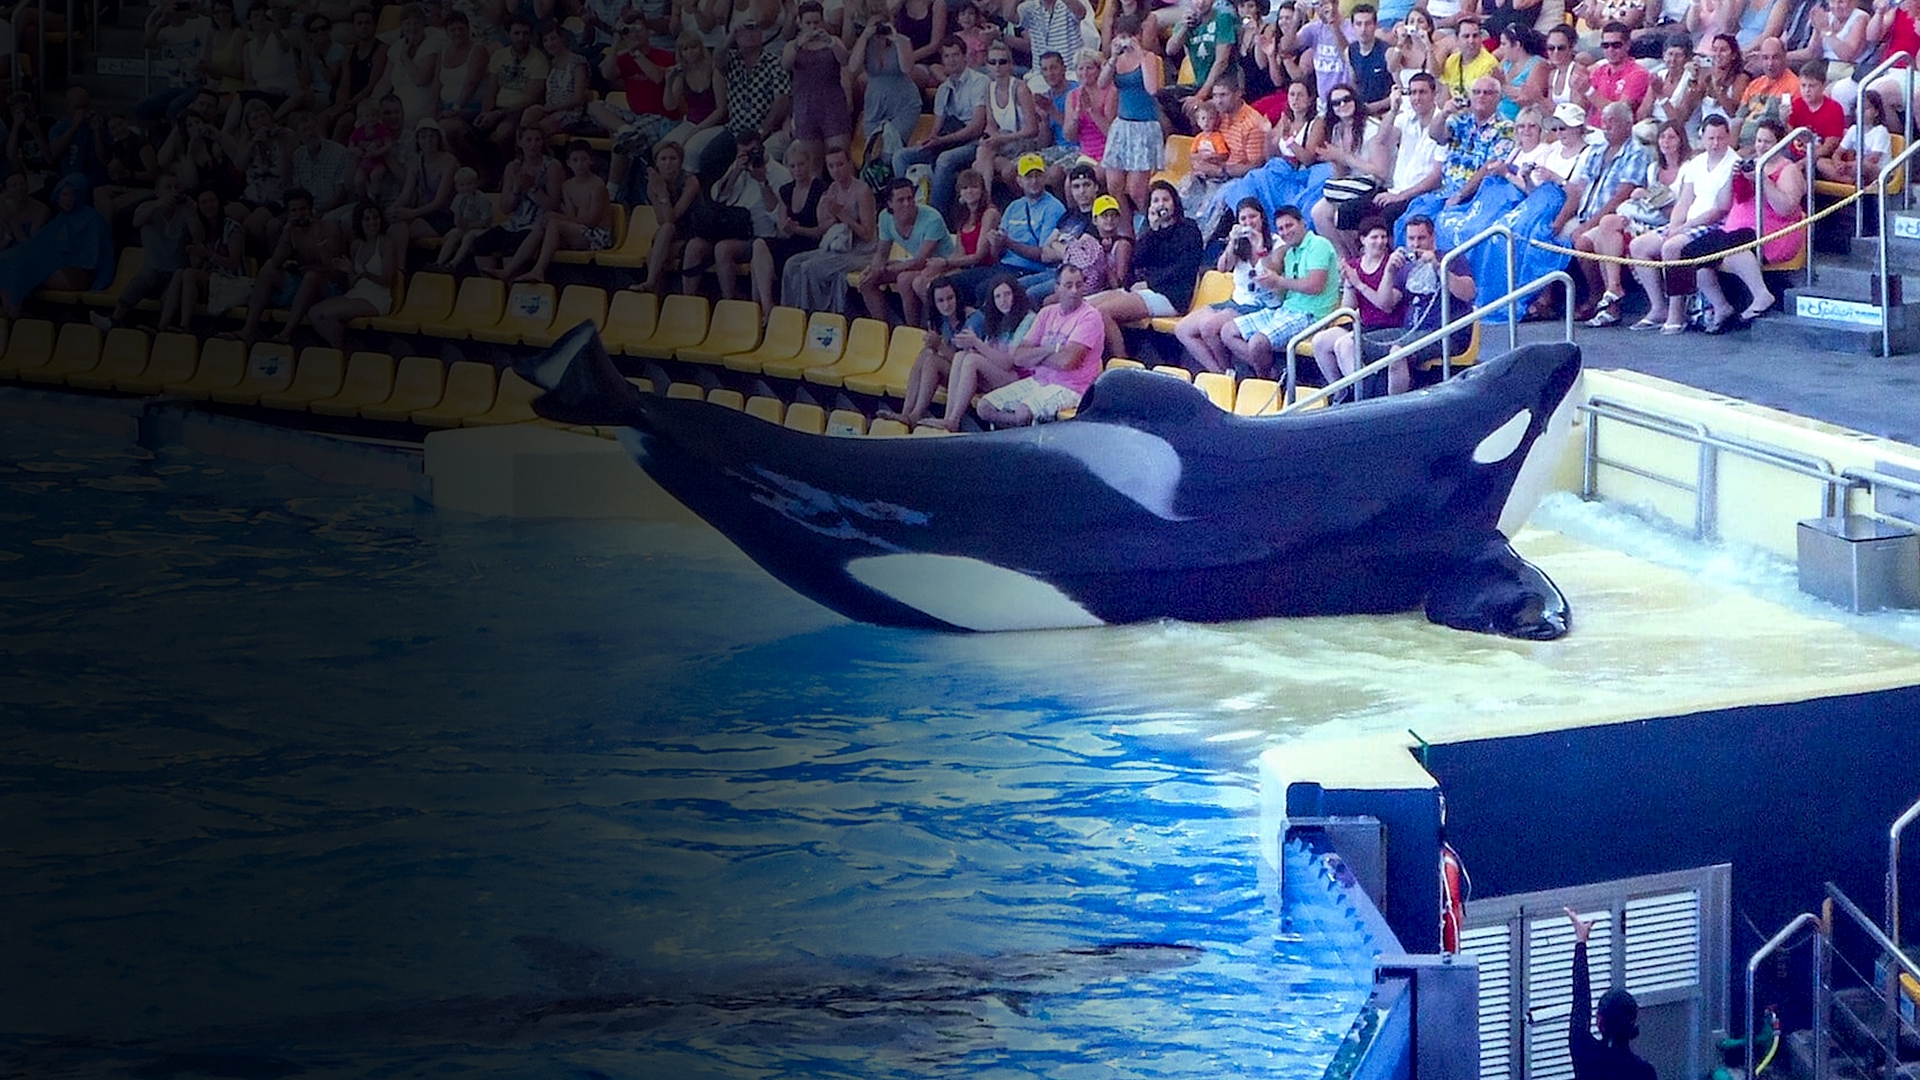 Chinese students pledge not to watch “Blackfish” perform